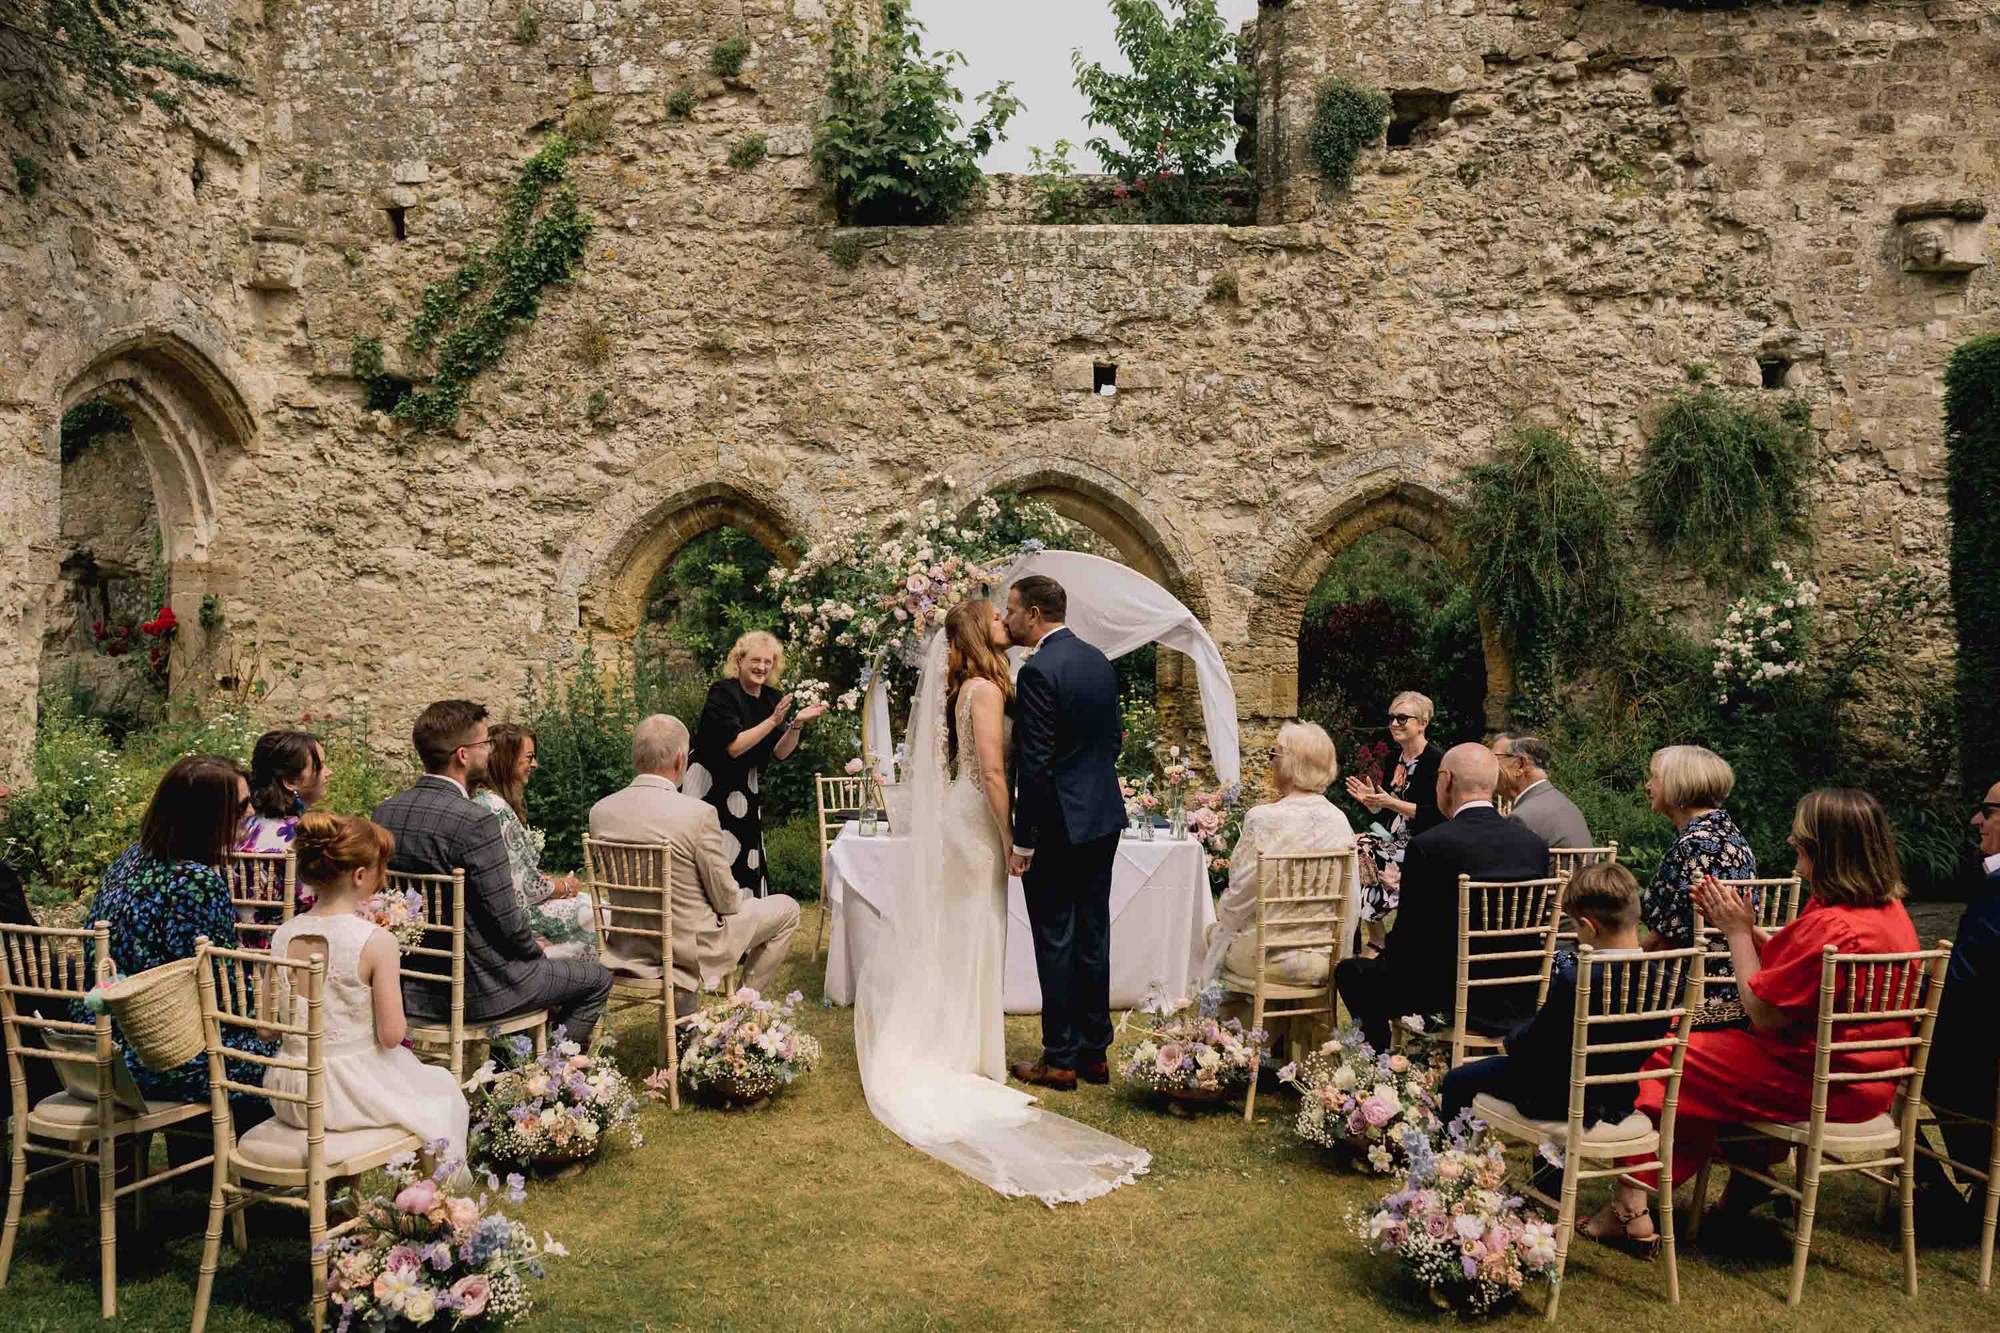 Bride and groom kiss on their wedding day at Amberley Castle.